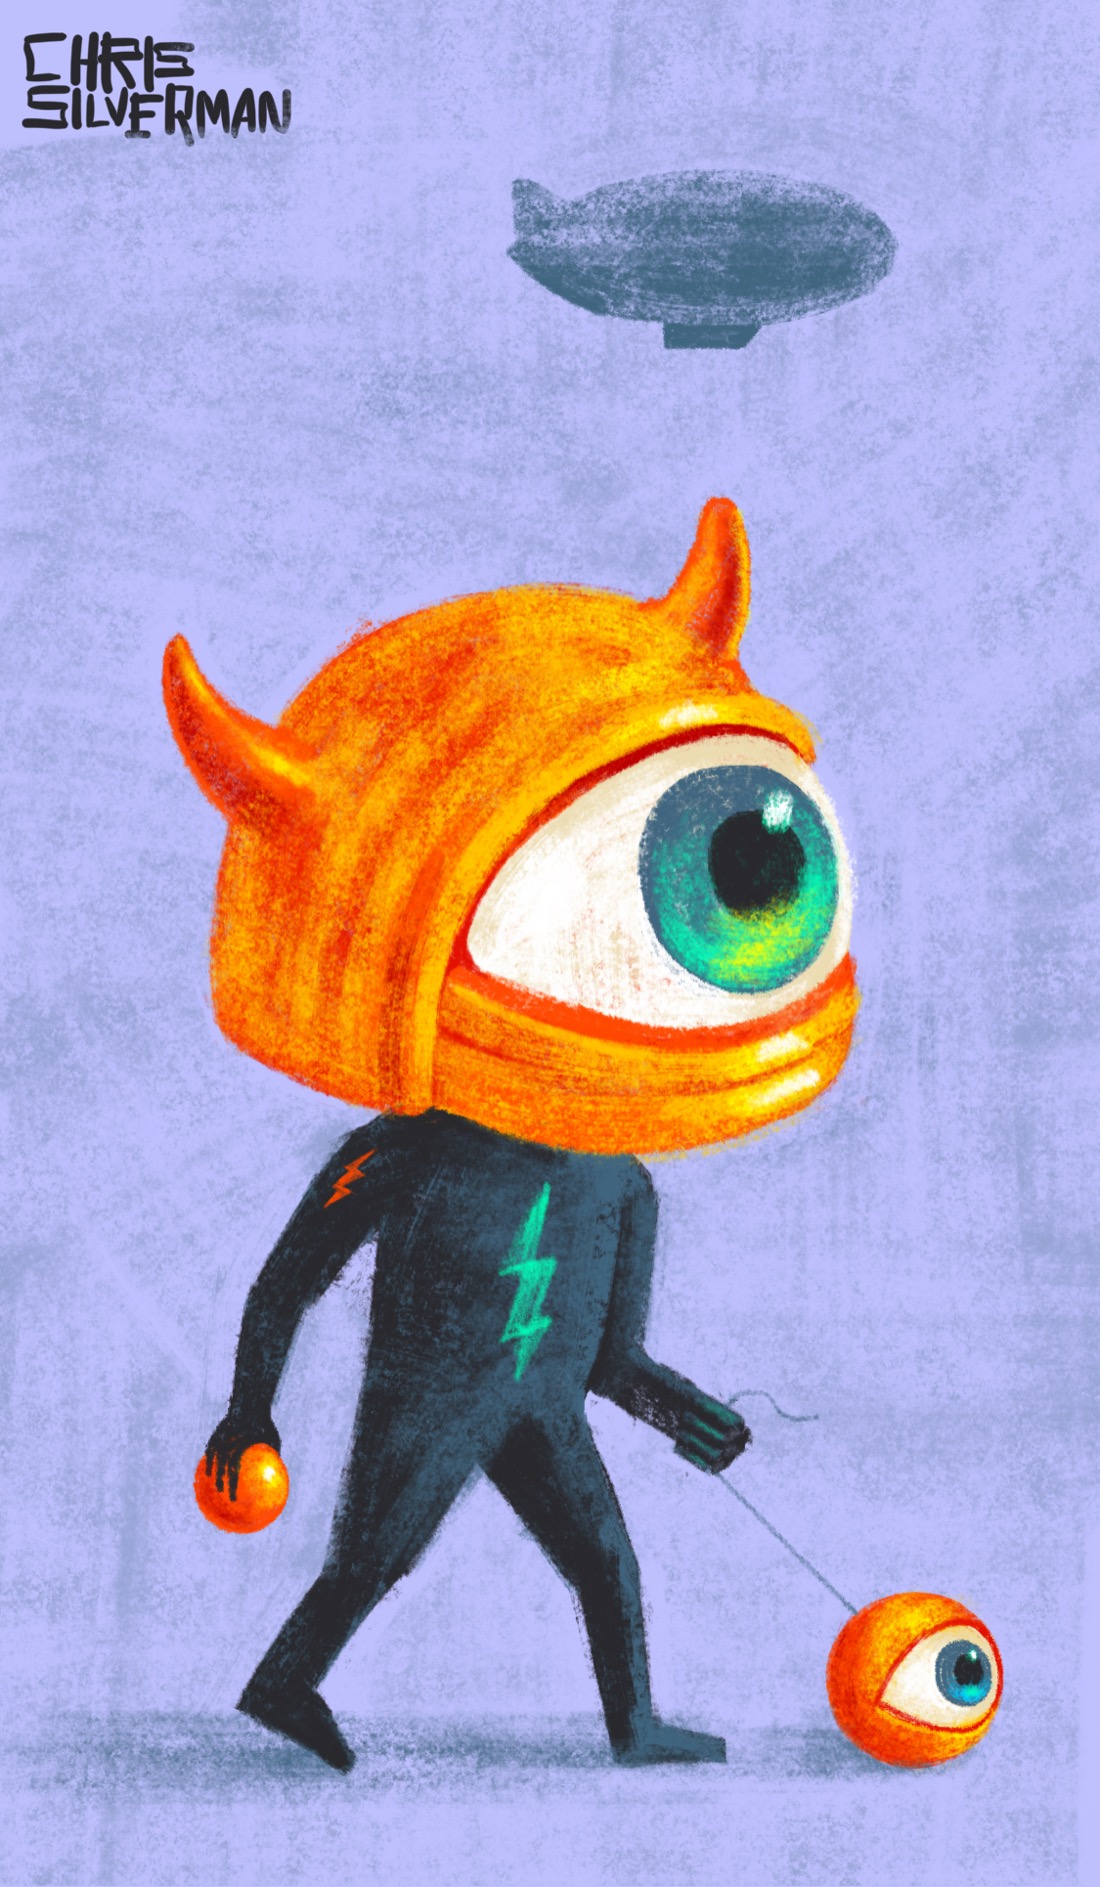 A small figure wearing a gray-black jumpsuit with a glowing green lightning bolt on the front of it, and a small orange lightning bolt on the shoulder, walks in an empty space that's entirely a light periwinkle blue. The figure is wearing a very large, bulky orange helmet, the front of which is occupied entirely by a giant eyeball with an iridescent green iris. The helmet has horns. In front of the figure, attached to a string that the figure is holding in its left hand, is a small, orange sphere, also with an eyeball in the front of it. That eye is blue. In its right hand, the figure is holding an orange sphere with no eyeball. The shadowy silhouette of a zeppelin hovers bizarrely in the background.